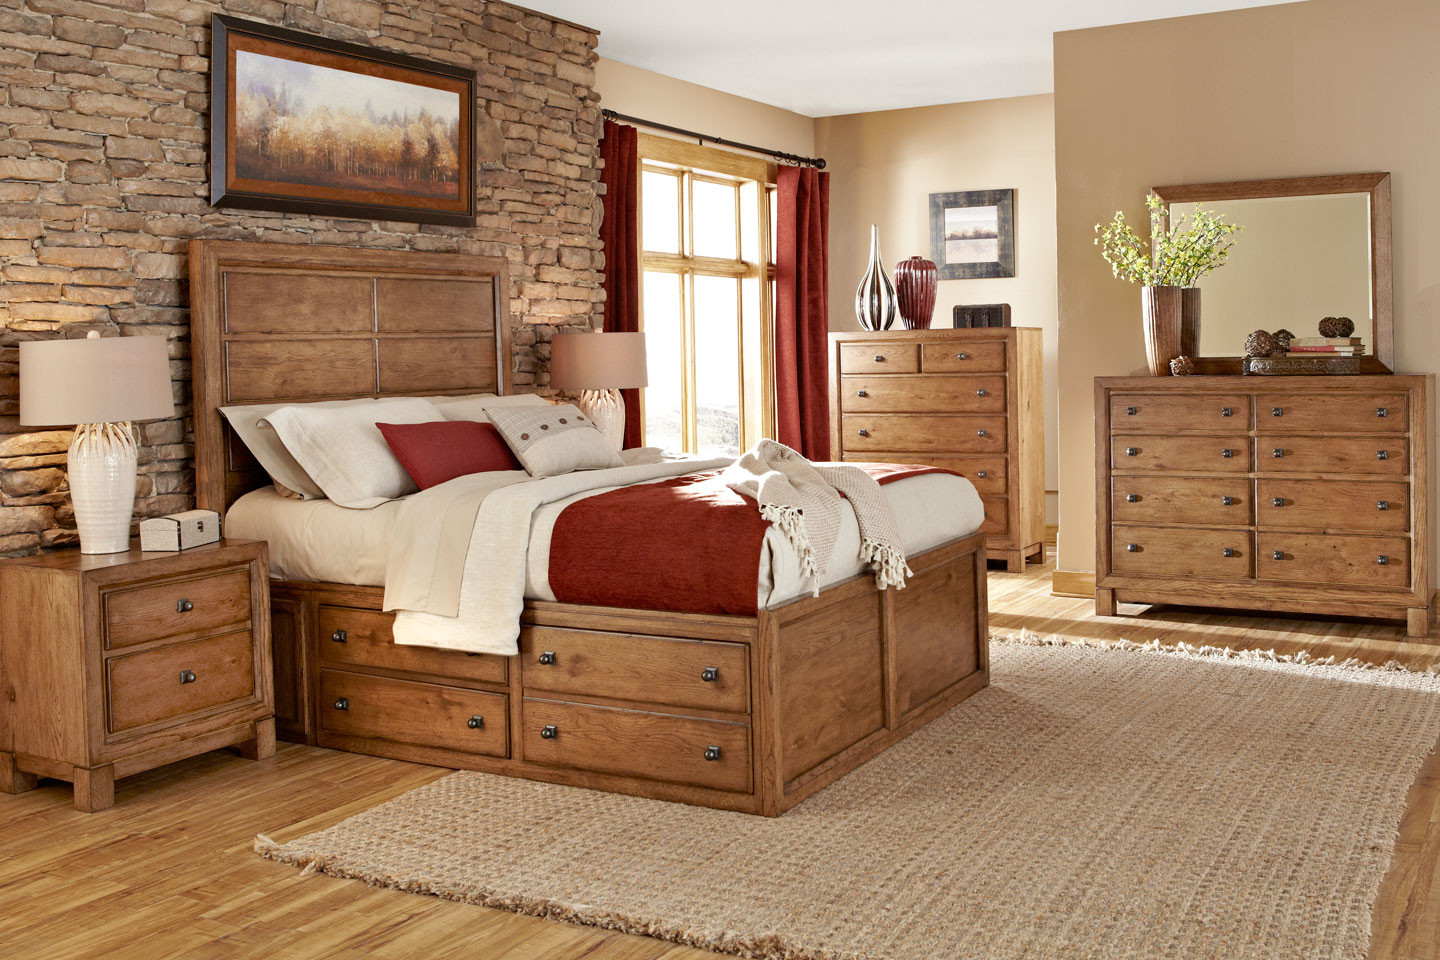 Cheap Rustic Bedroom Furniture Sets
 Bedroom with wooden furniture wholesale solid wood